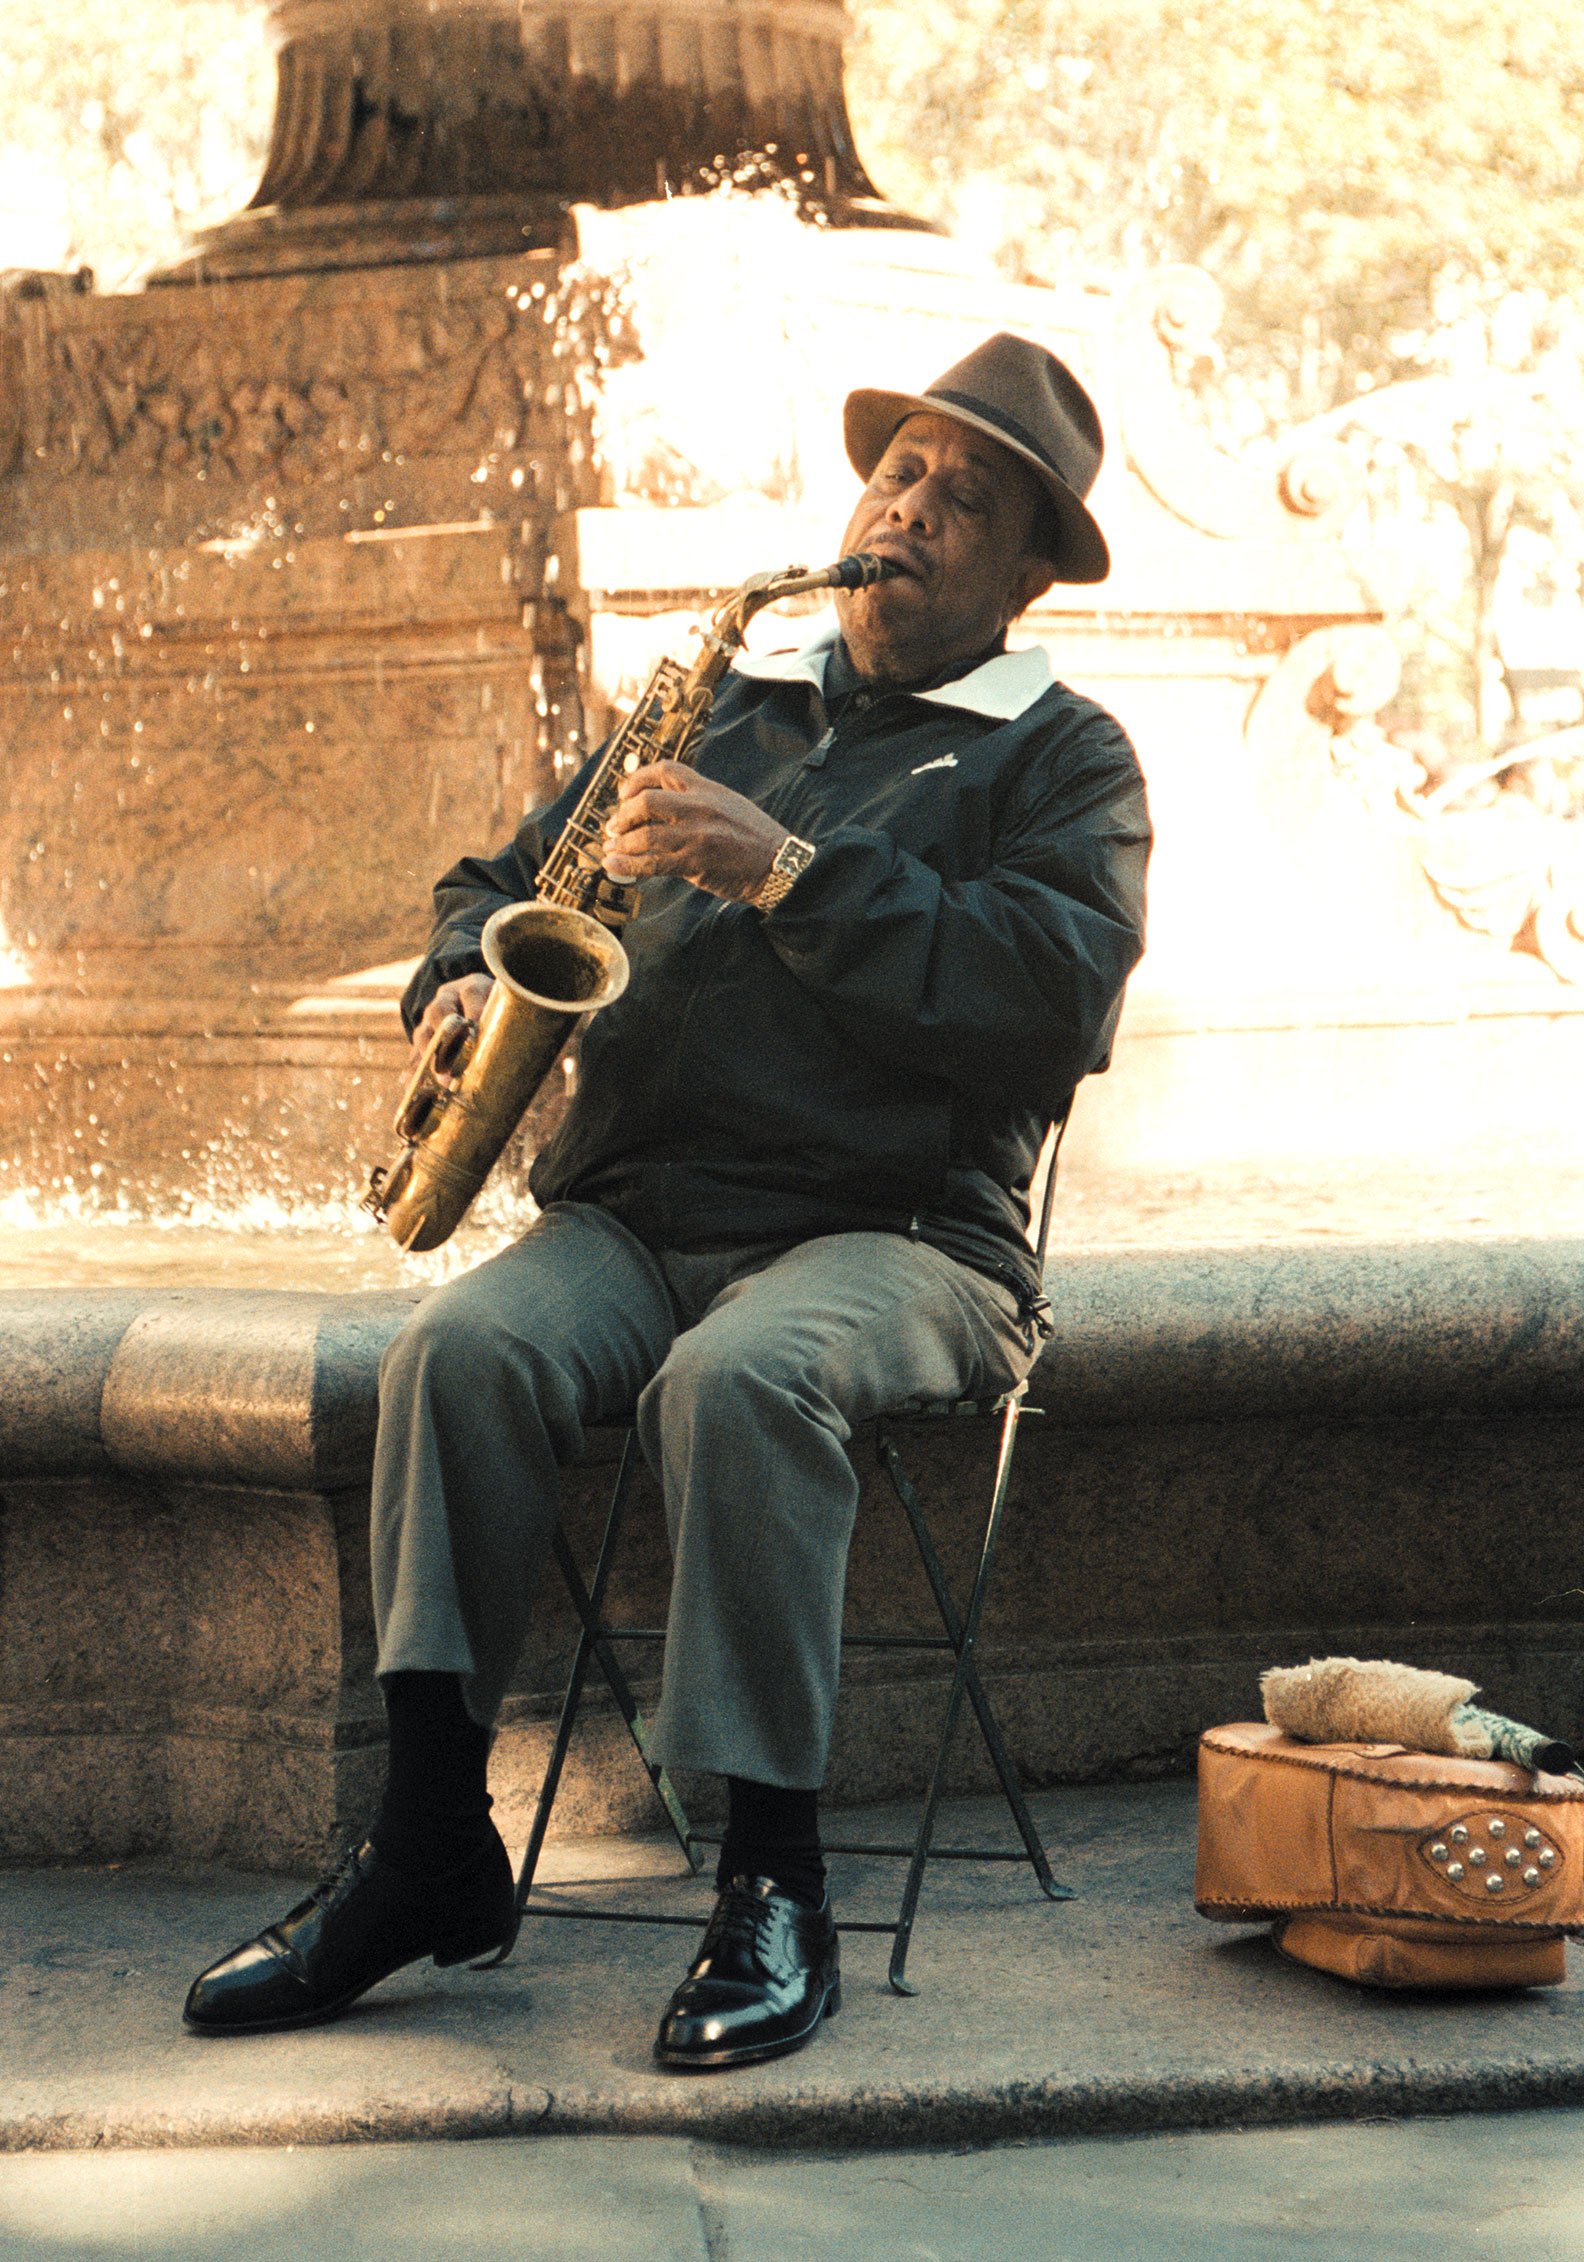 LOU DONALSON - BRYANT PARK, NYC - 2000